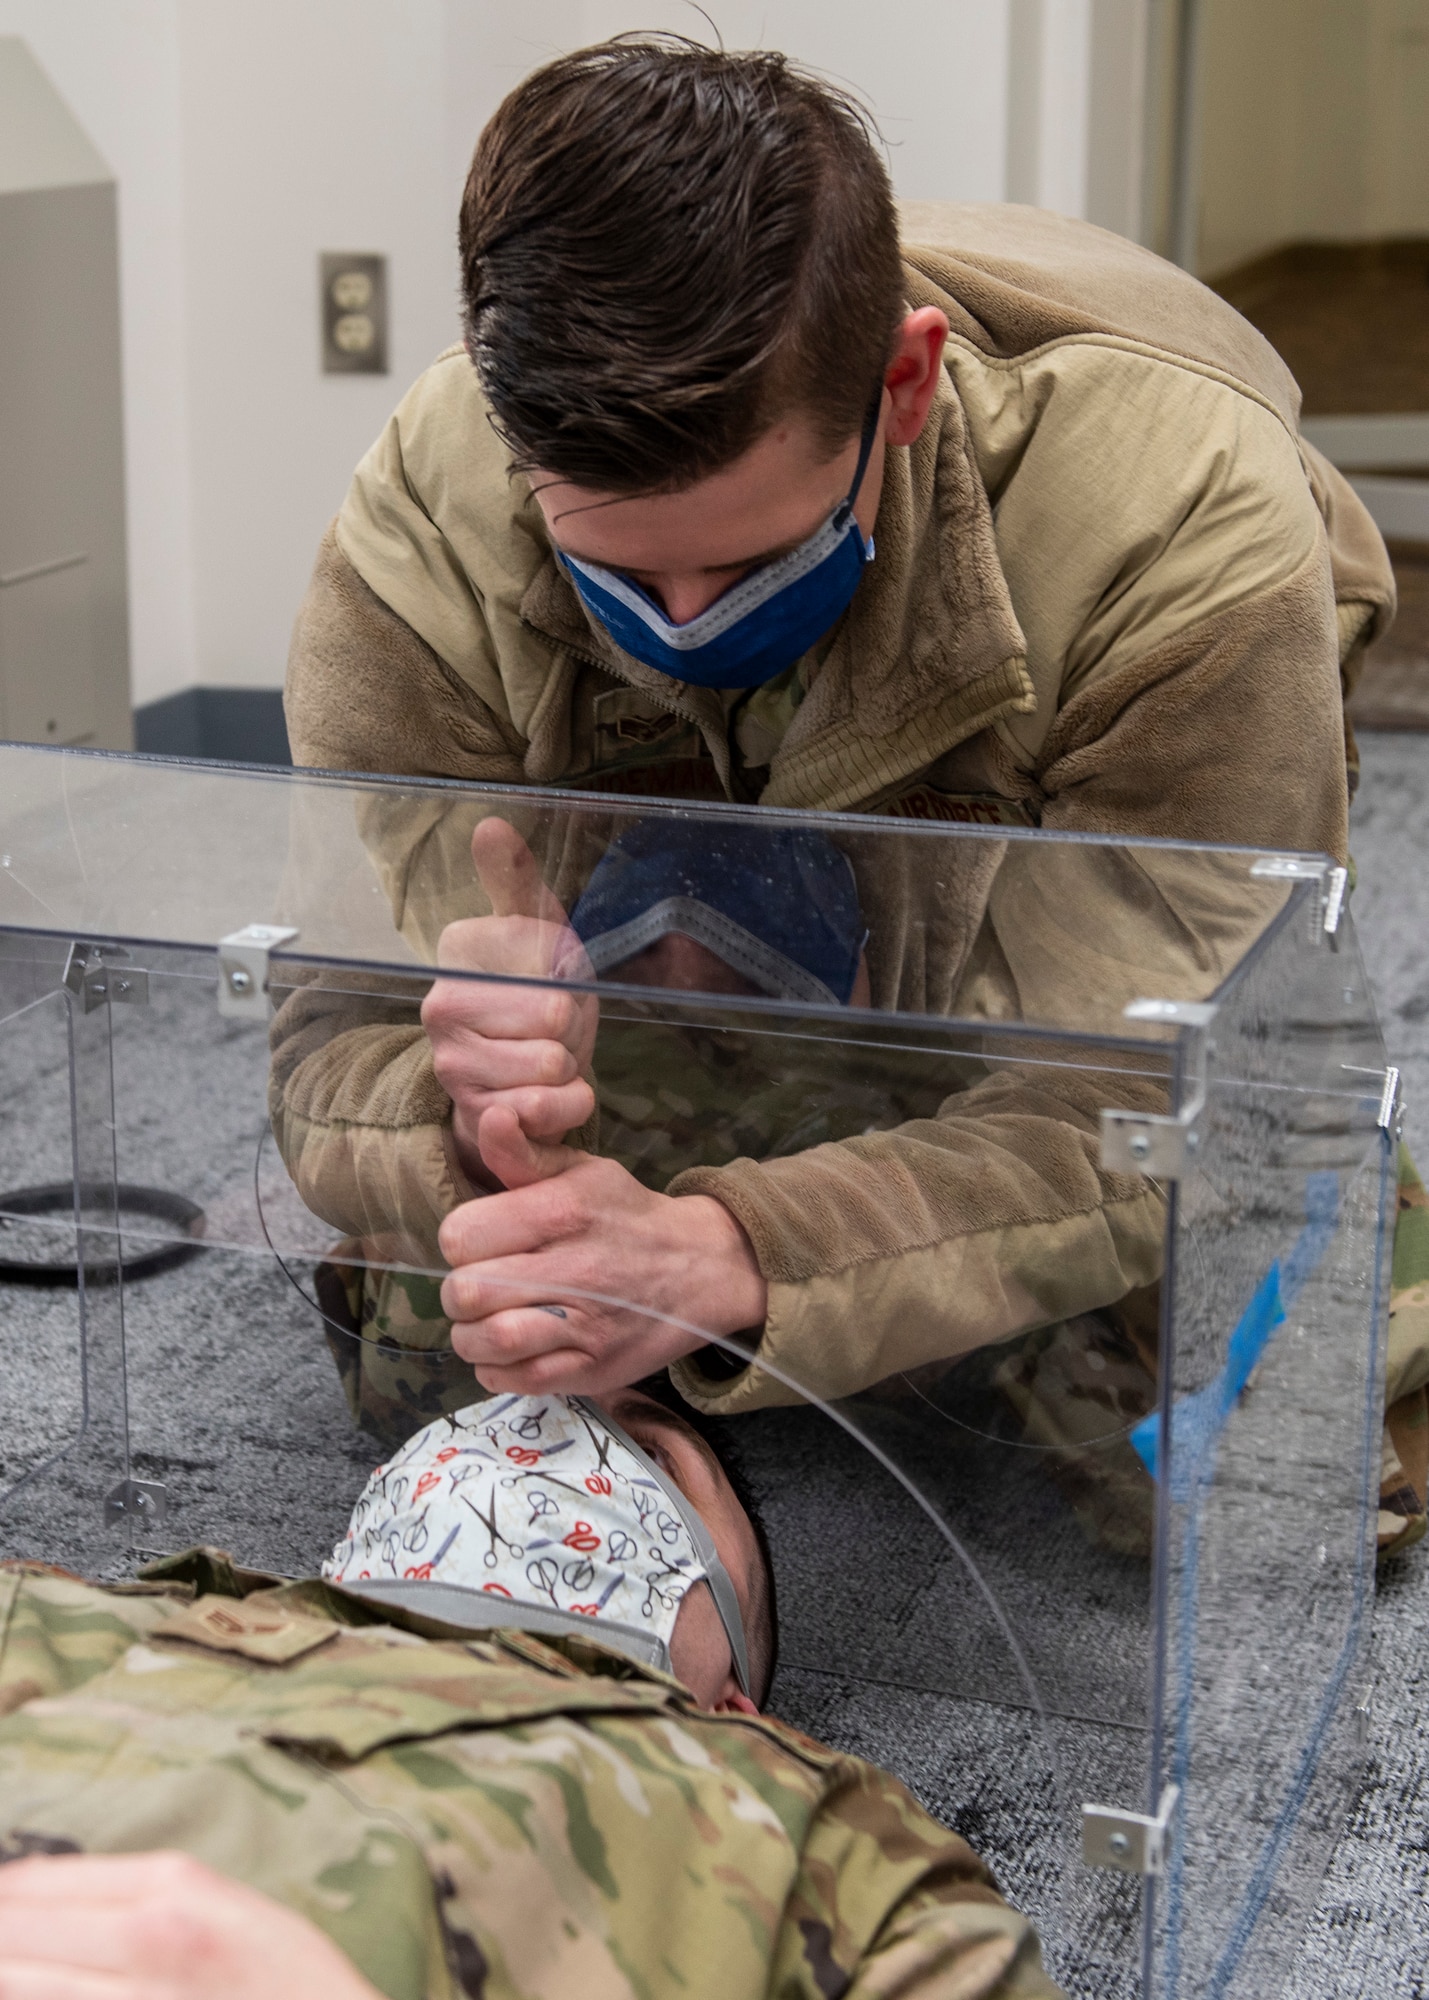 U.S. Air Force Senior Airman Michael Shoemaker, 673d Medical Support Squadron biomedical equipment technician, demonstrates how intubation might look on U.S. Air Force Staff Sgt. Andrew Taylor, 673d Medical Support Squadron medical logistics noncommissioned officer in charge of acquisitions, under an innovated, plastic polycarbonate enclosure at Joint Base Elmendorf-Richardson, Alaska, April 7, 2020. Shoemaker and Taylor designed and built the reusable device to be a protective barrier between medical providers and a patient to prevent possible exposure to COVID-19 and other airborne diseases. The enclosure can be placed over a patient’s head and upper torso prior to intubation or similar treatments, with access to the patient via two holes at the head of the enclosure for a physician's hands and arms, and two side doors for additional access.